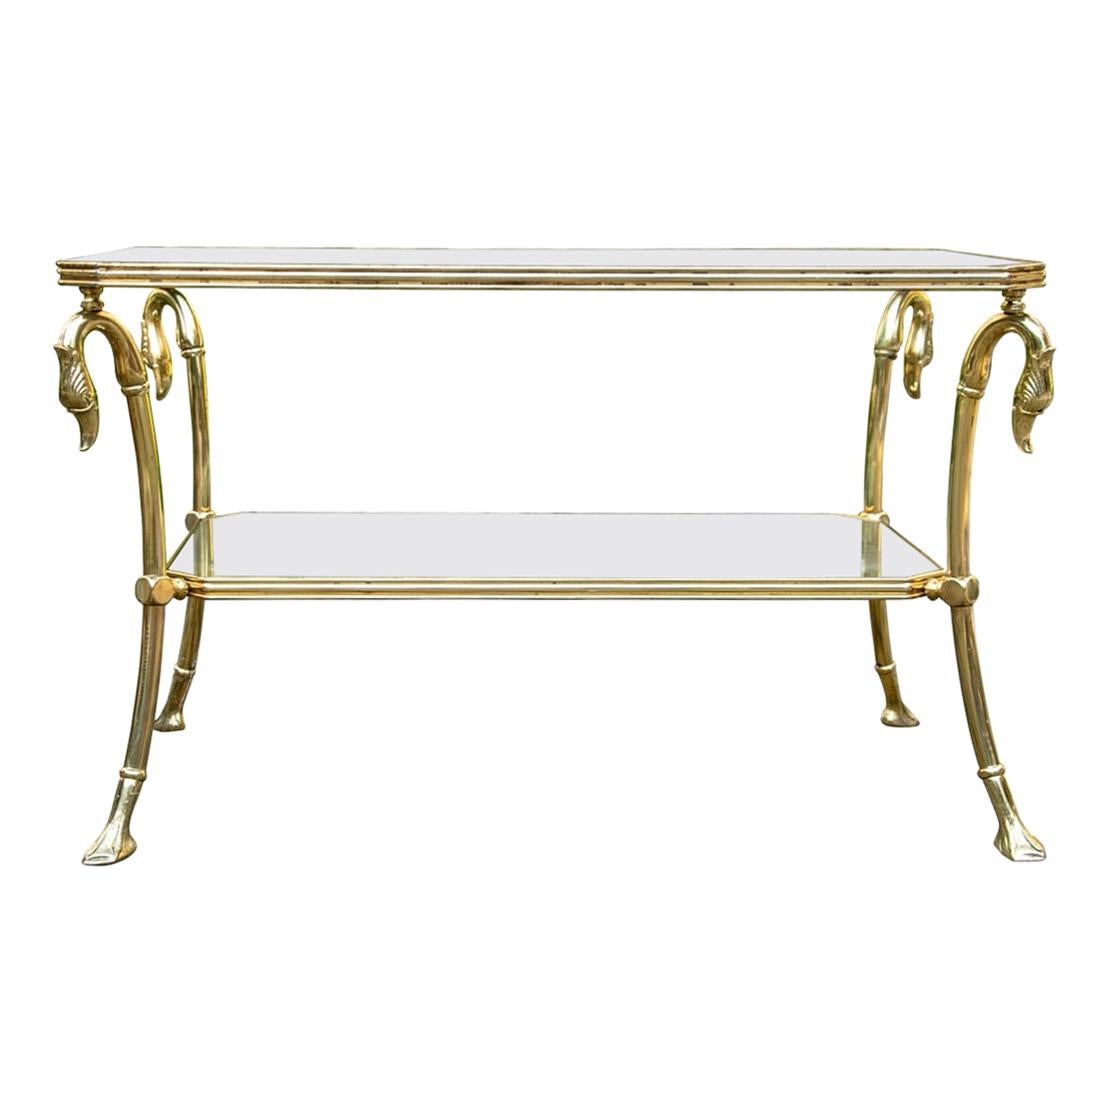 Hollywood Regency Style Tiered Brass and Glass Coffee Table